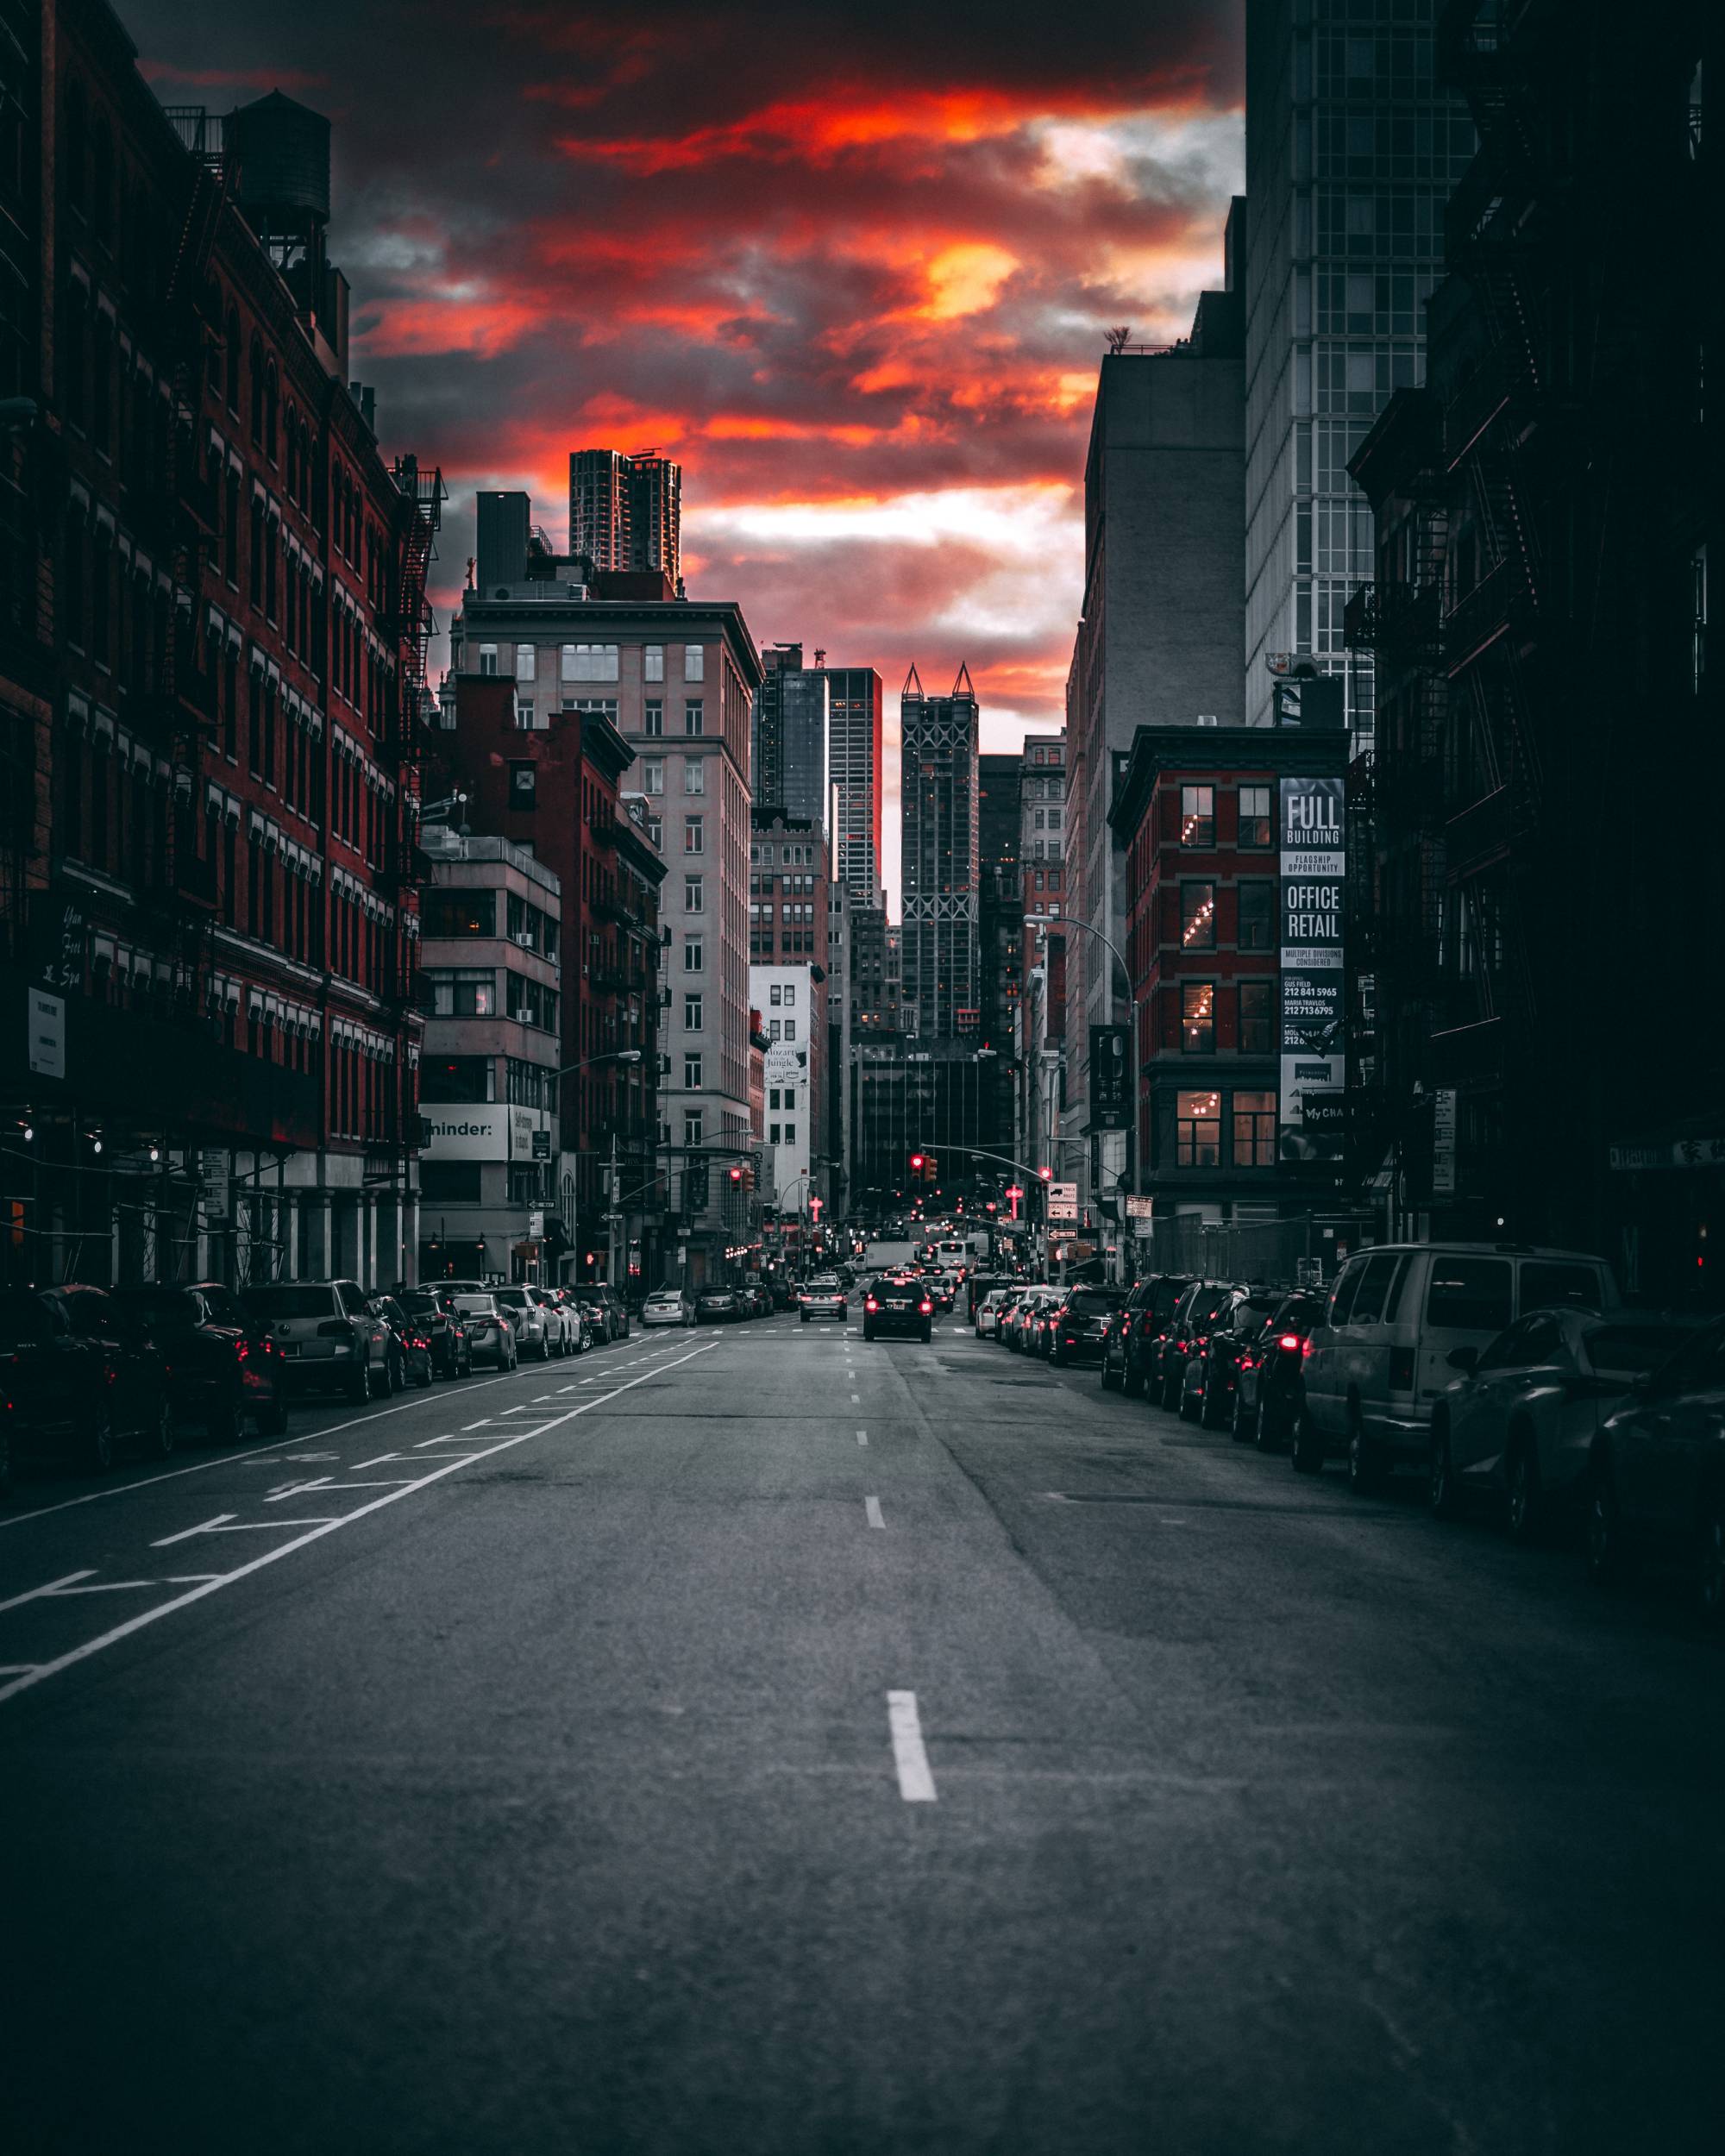 This NYC street at sunset is colorful and bustling. Experience the beauty of any city with drvn global chauffeured service.